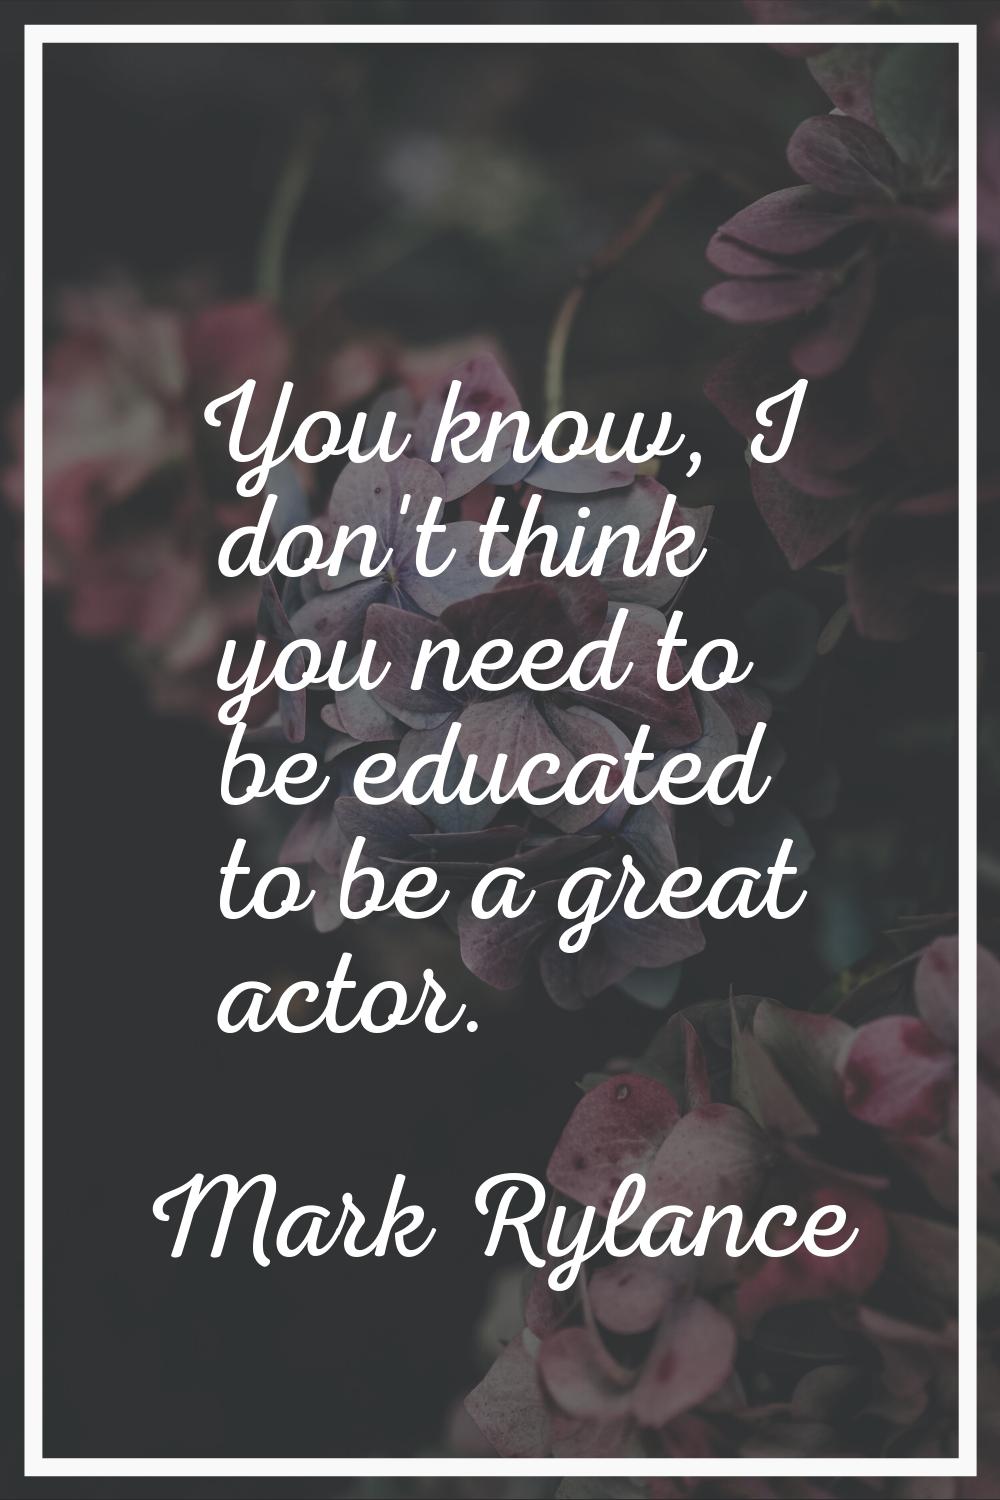 You know, I don't think you need to be educated to be a great actor.